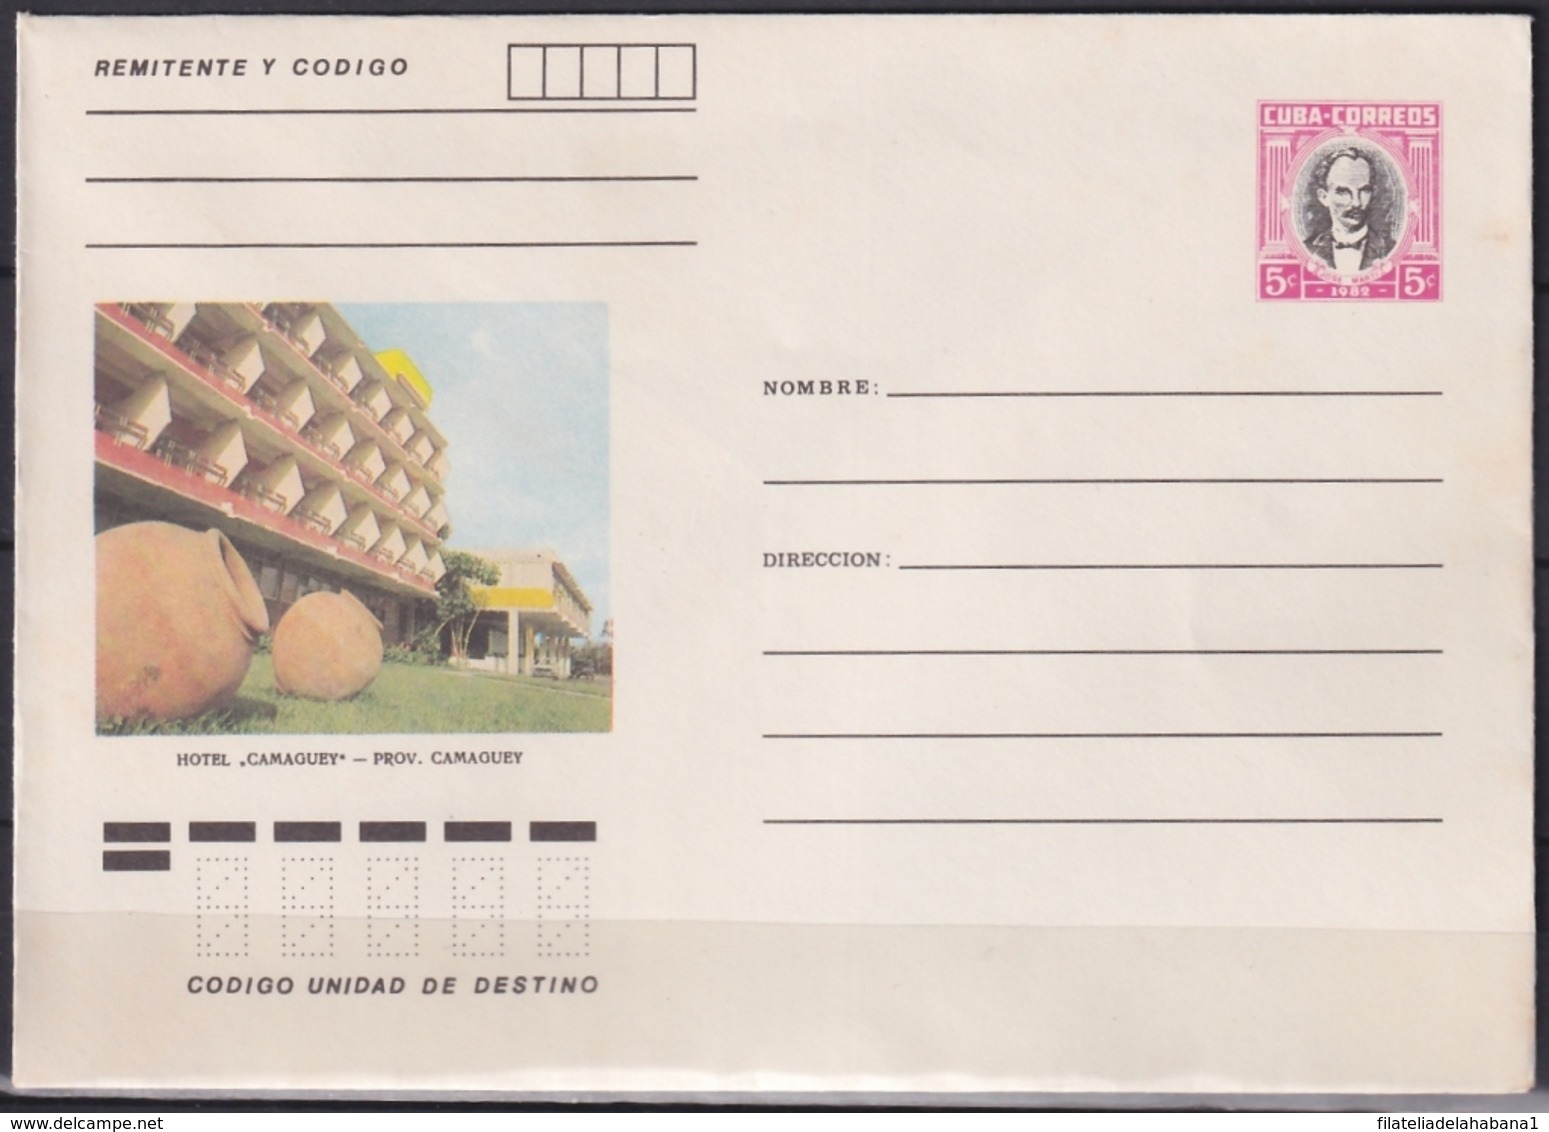 1982-EP-205 CUBA 1982 5c POSTAL STATIONERY COVER. CAMAGUEY, HOTEL CAMAGUEY. LIGERAS MANCHAS. - Covers & Documents